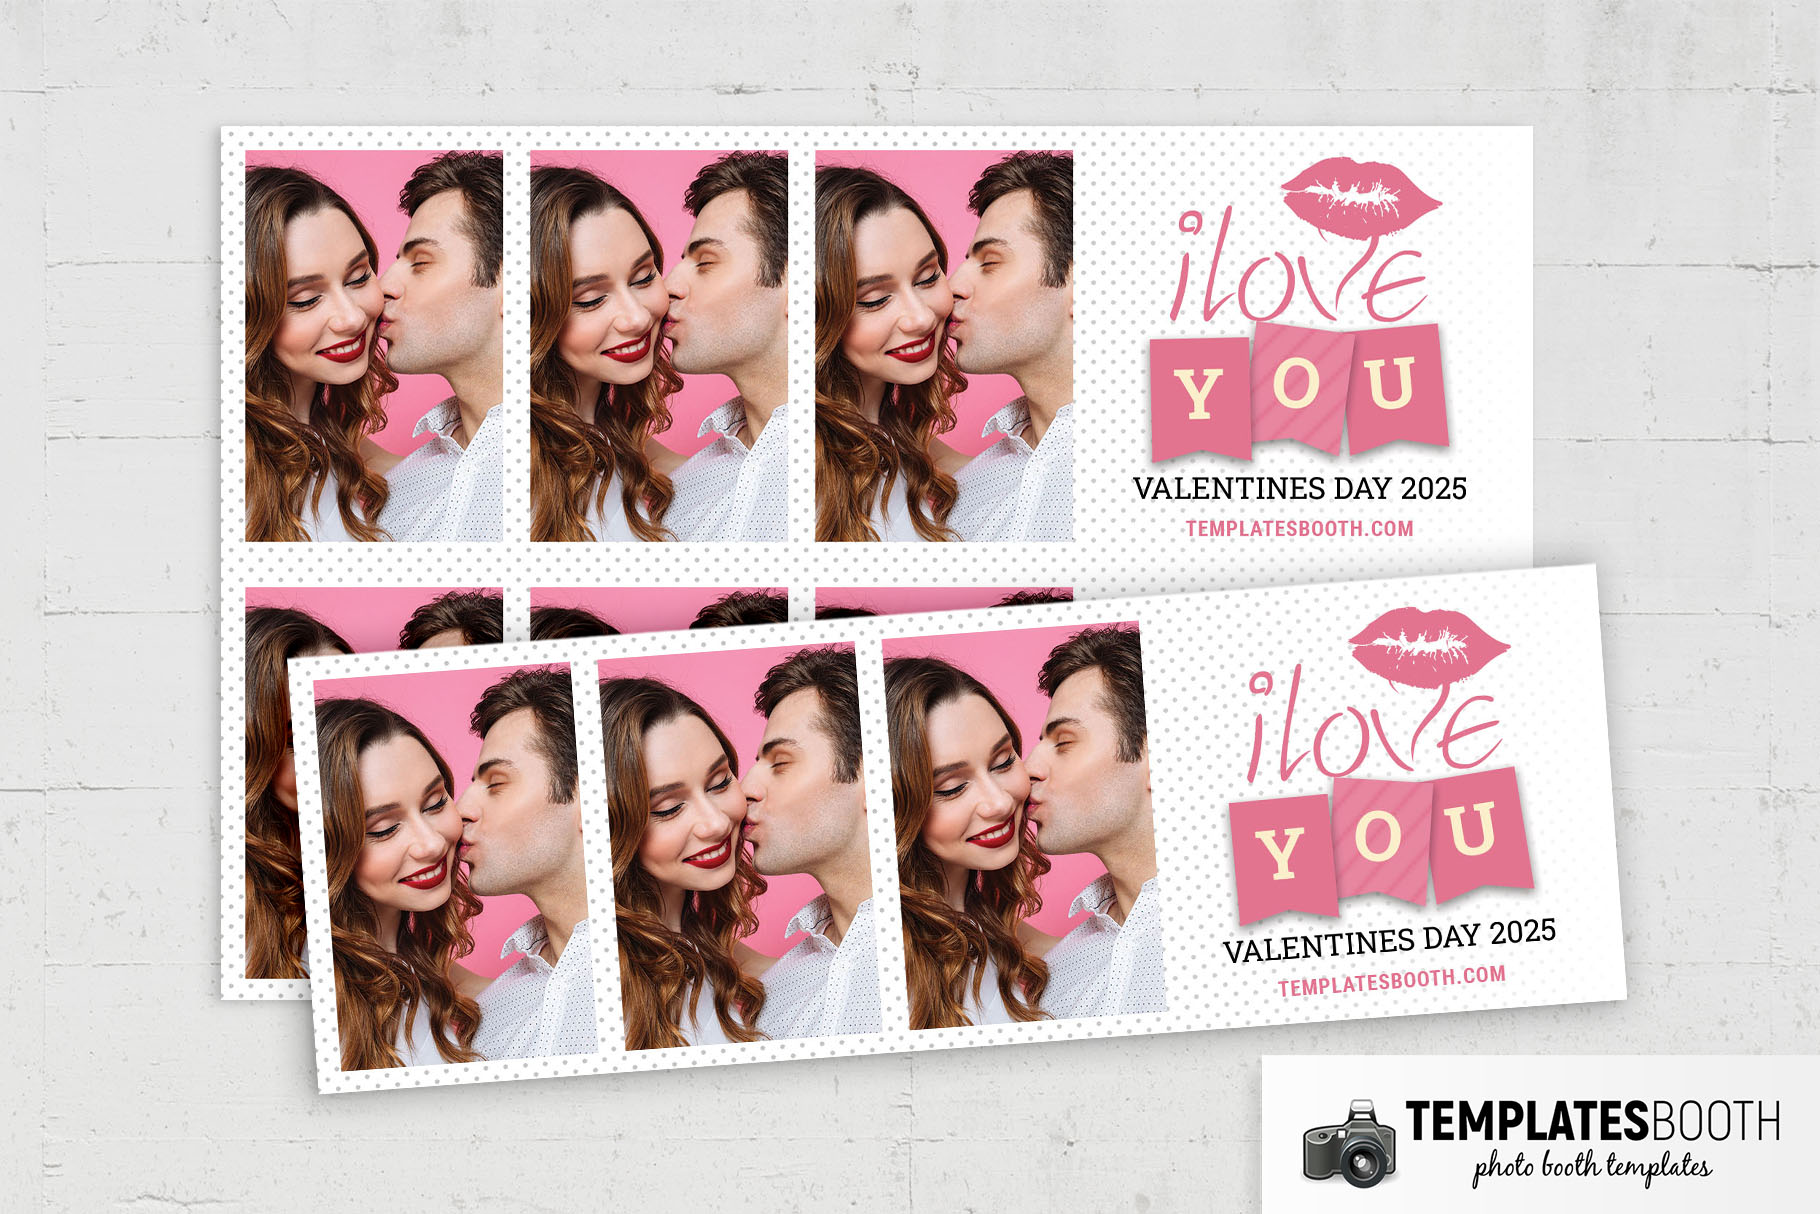 Valentines Kiss Photo Booth Template